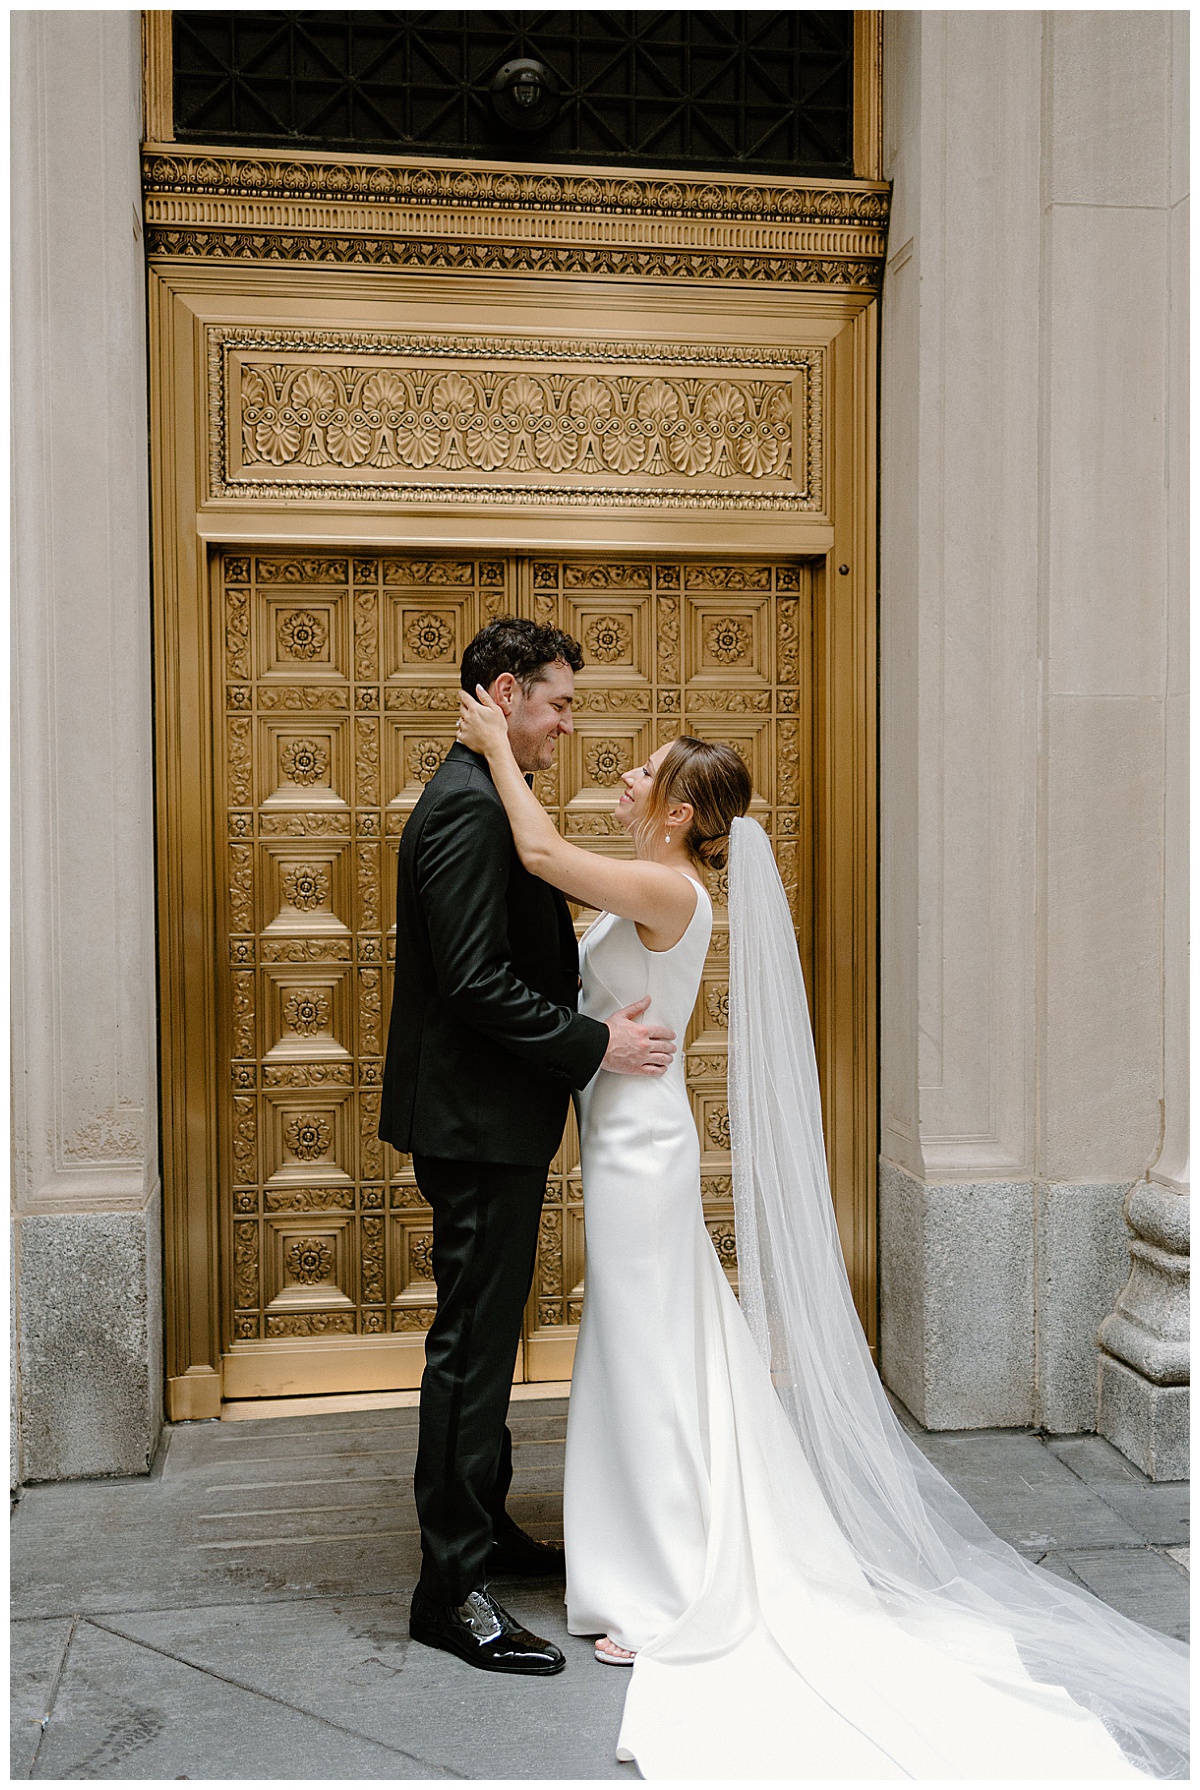 couple looks at each other in front of ornate gold door by Indigo Lace Collective